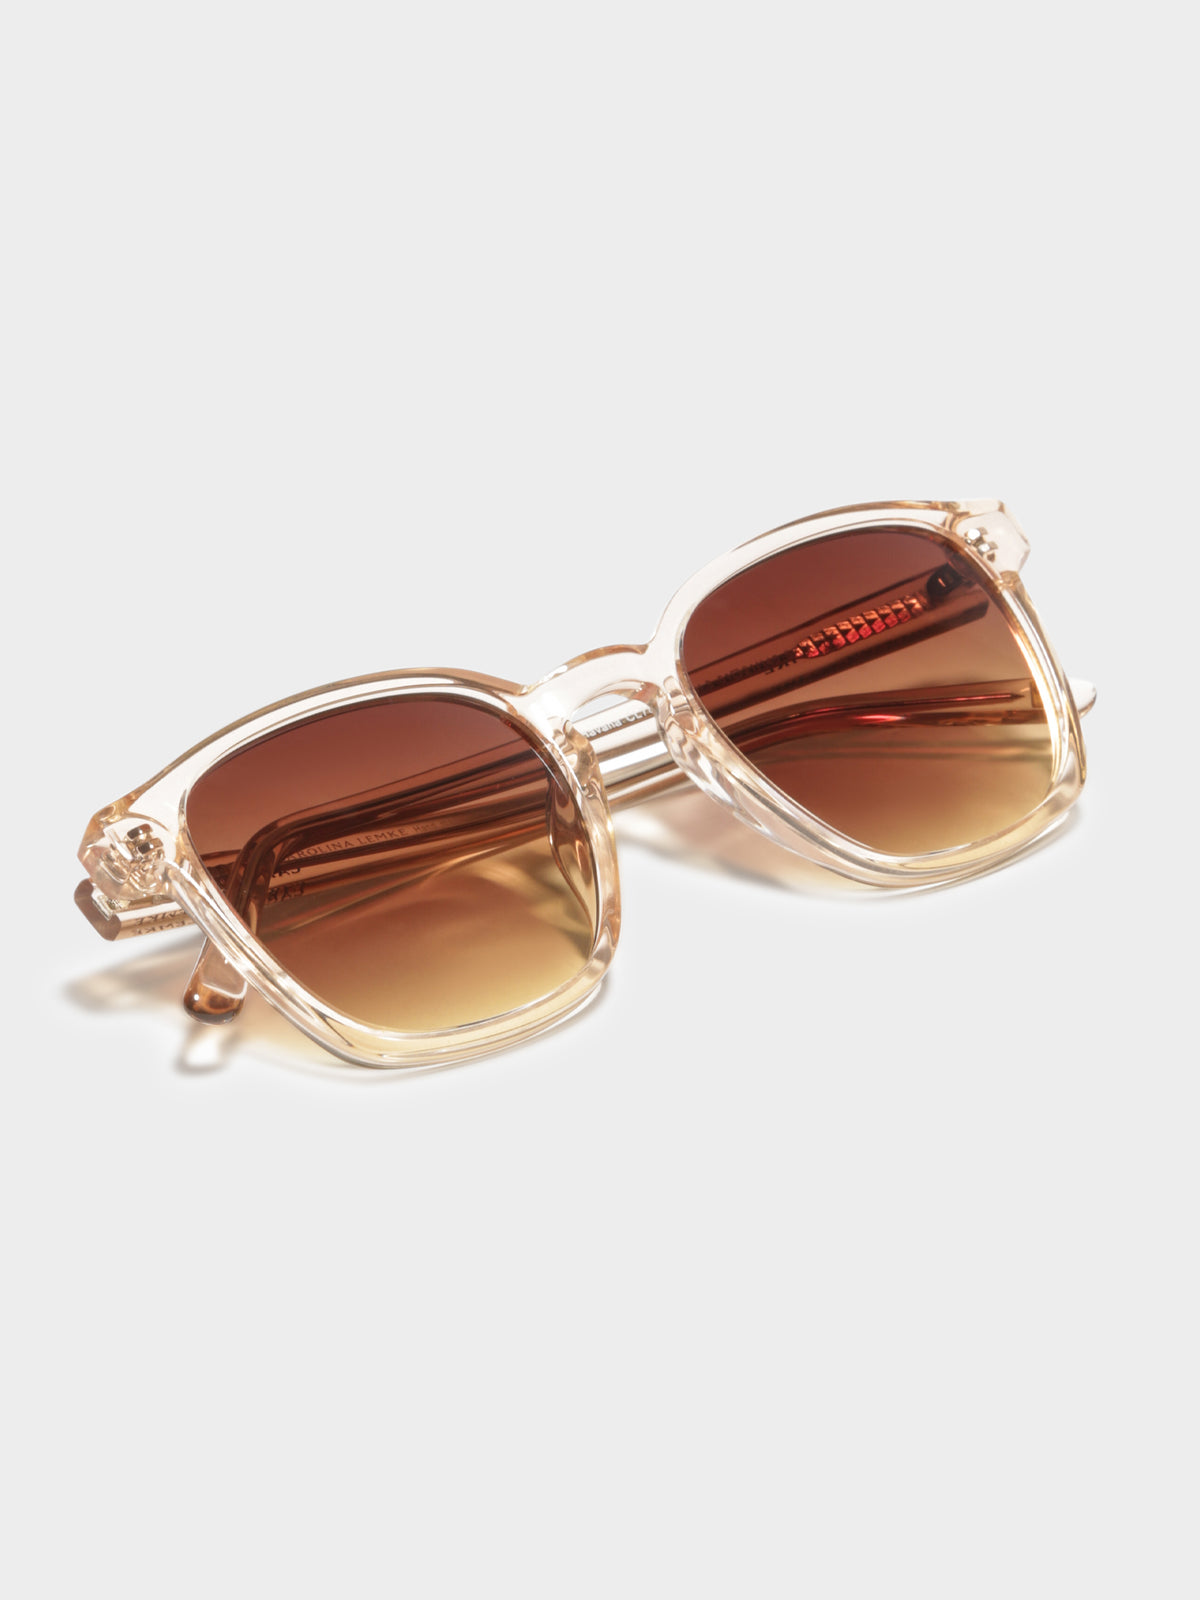 CL7820 Sunglasses in Transparent Champagne